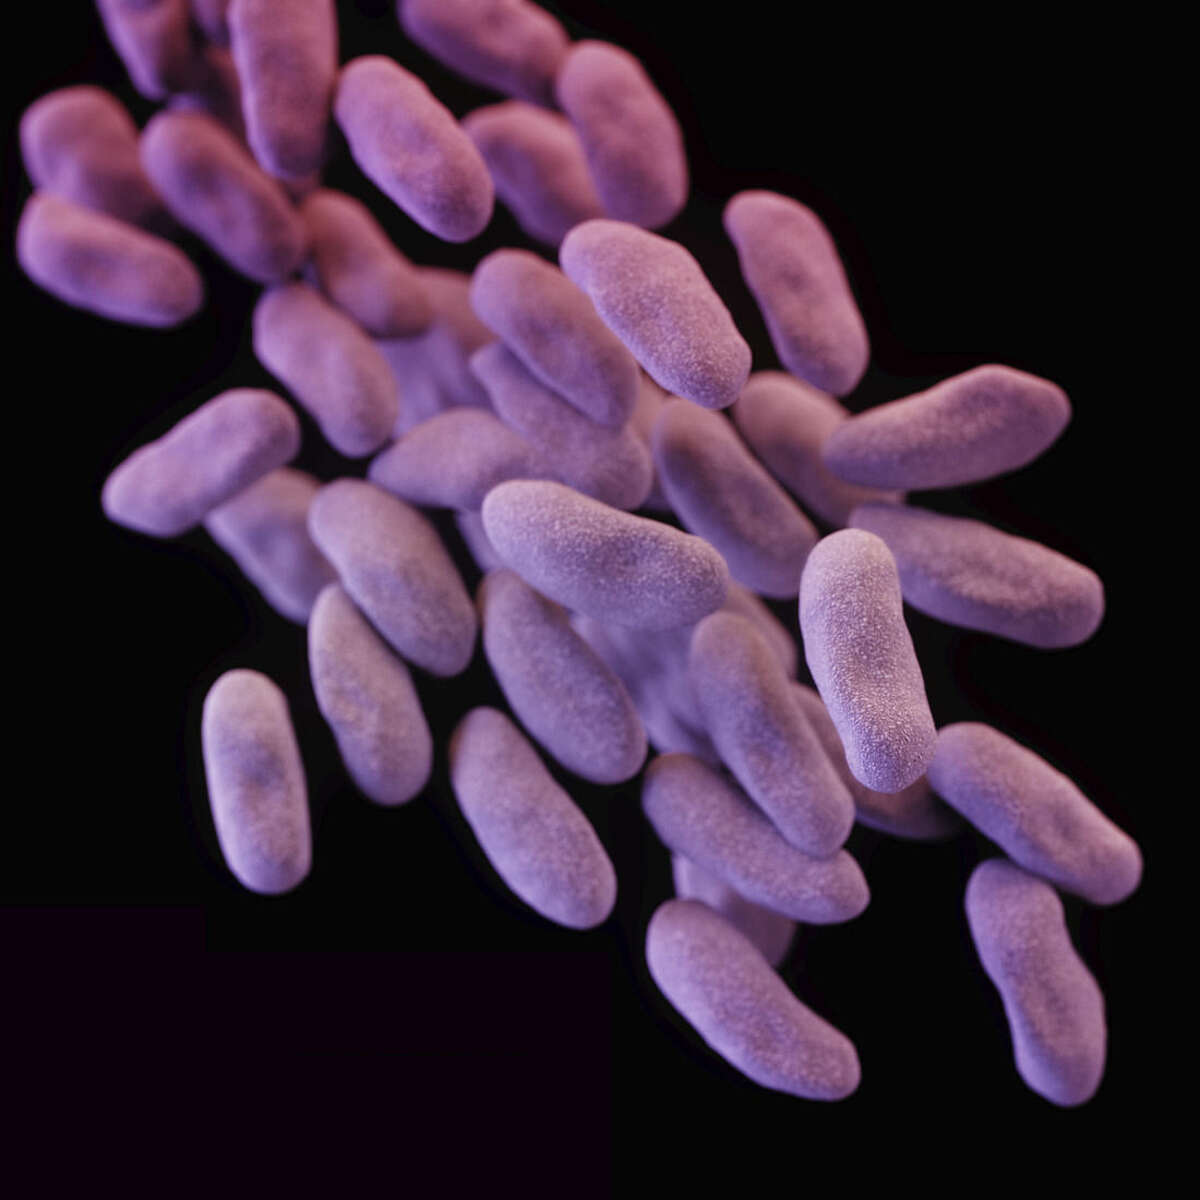 This illustration released by the Centers for Disease Control depicts a three-dimensional (3D) computer-generated image of a group of carbapenem-resistant Enterobacteriaceae bacteria. The artistic recreation was based upon scanning electron micrographic imagery. A potentially deadly "superbug" resistant to antibiotics infected seven patients, including two who died, and more than 100 others were exposed at a Southern California hospital through contaminated medical instruments, UCLA reported Wednesday Feb. 18, 2015. (AP Photo/Centers for Disease Control)